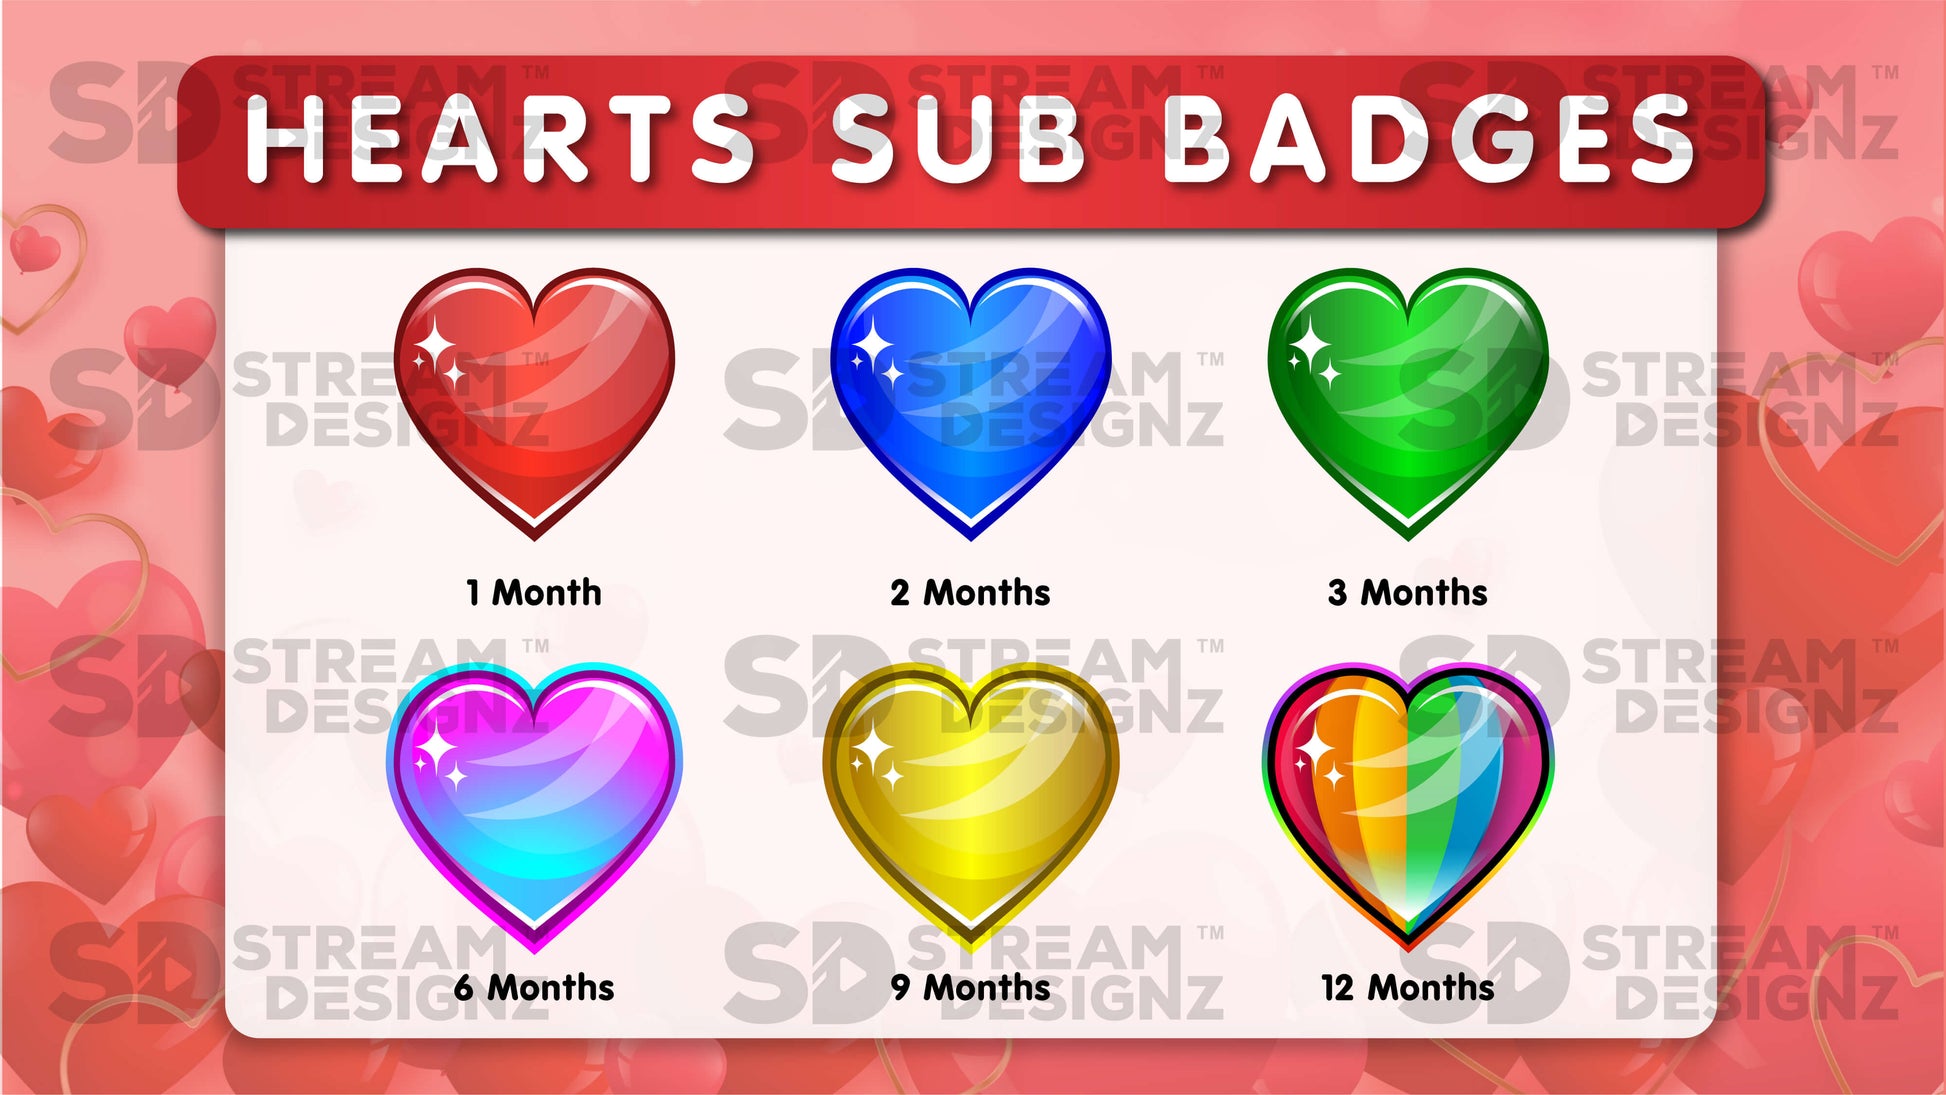 6 pack sub badges preview image hearts stream designz